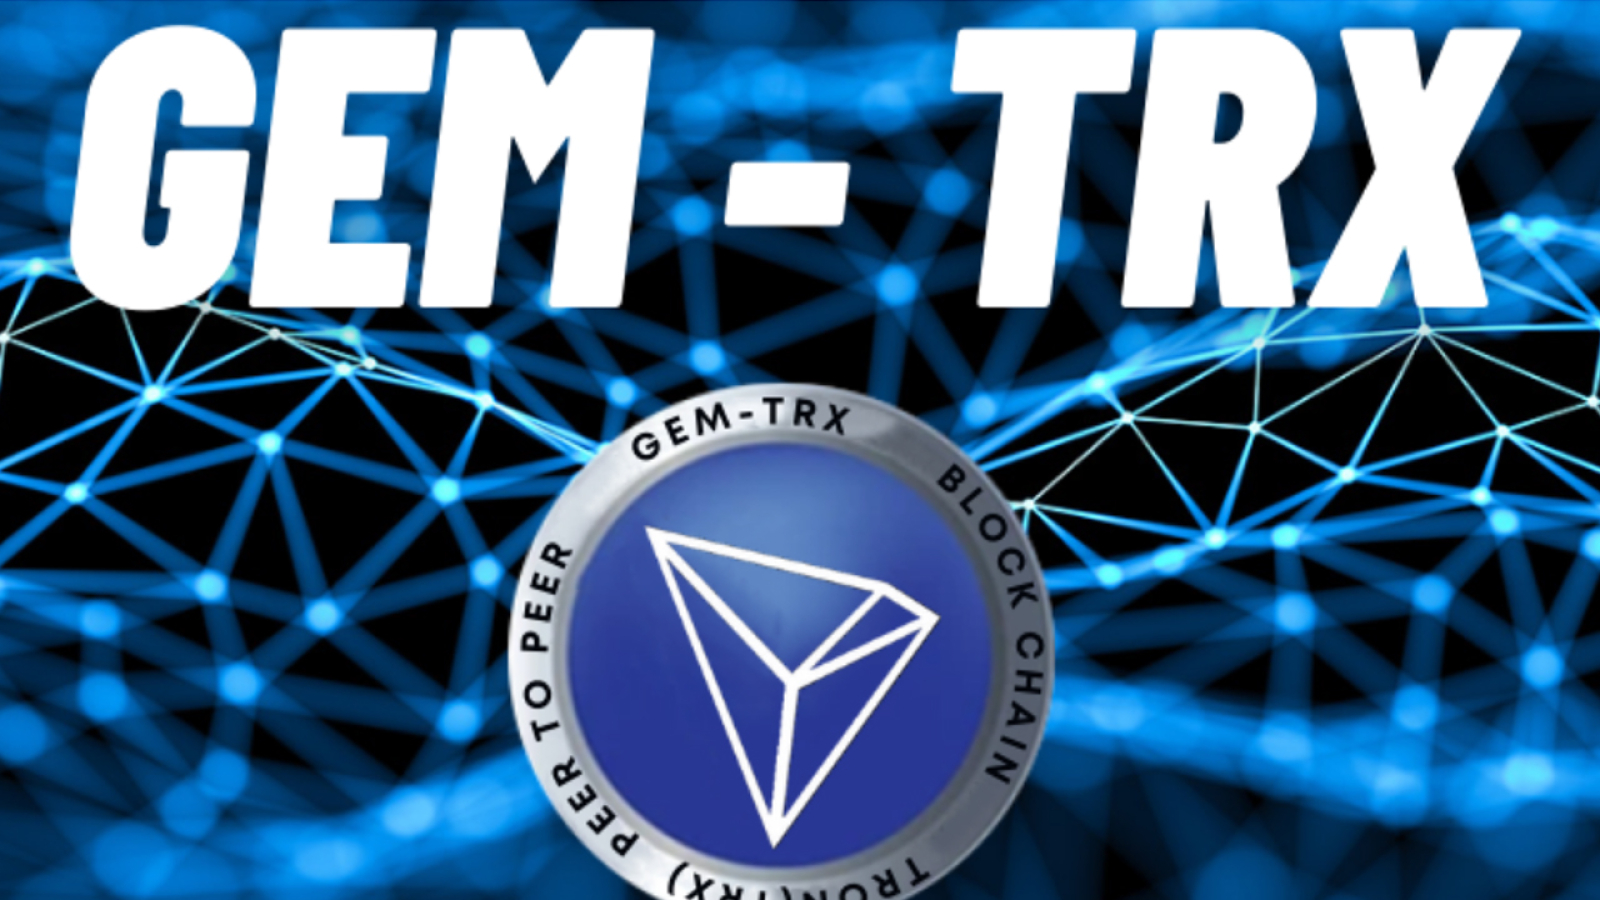 GemTRX Offers Secure and Revolutionary Cloud Mining Solutions